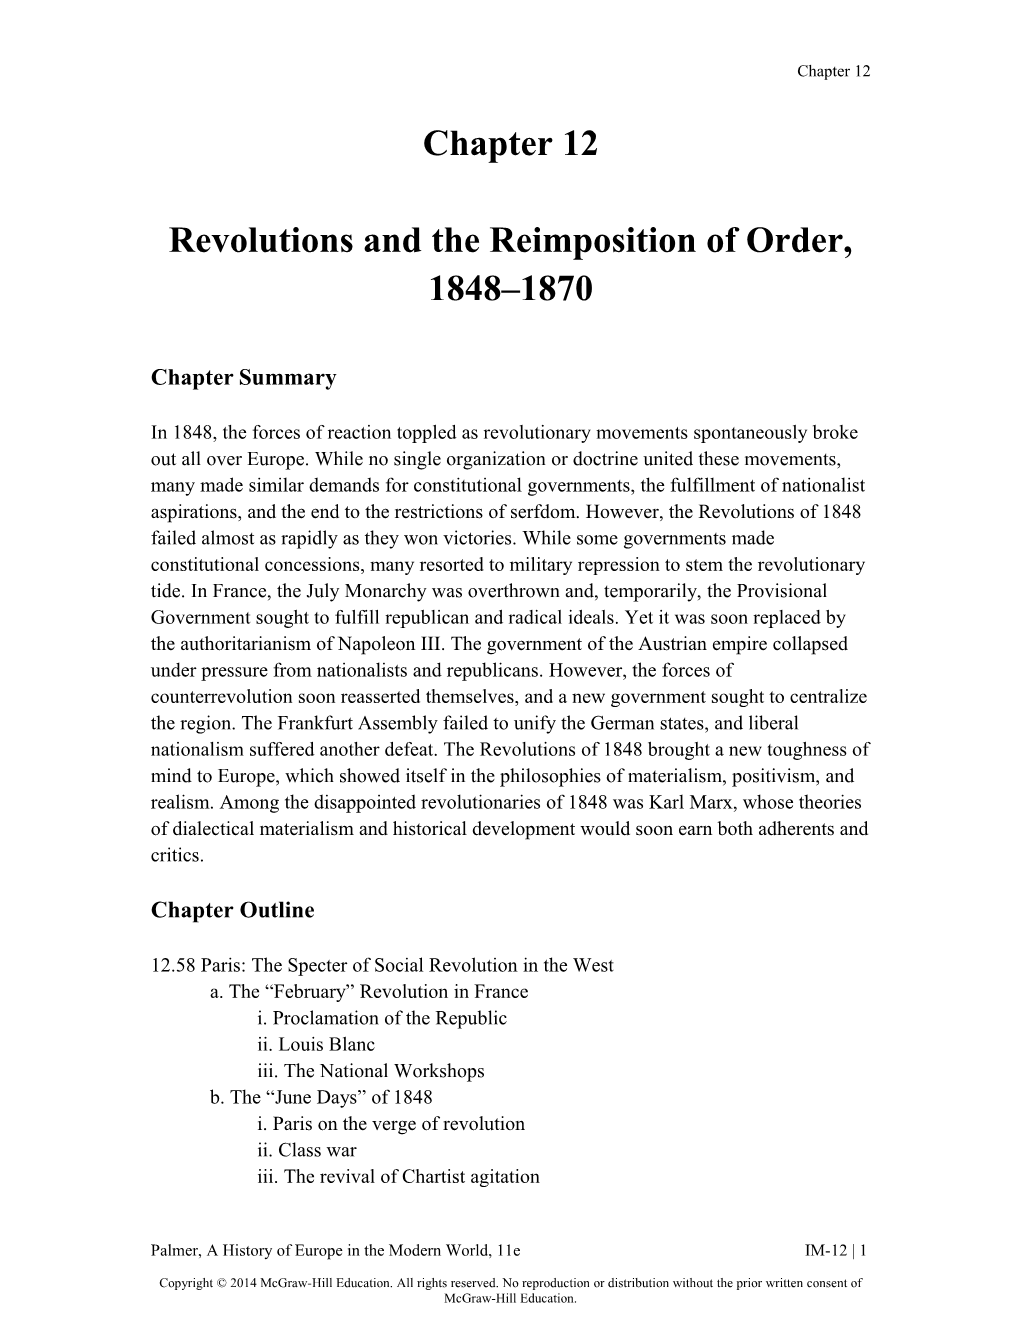 Revolutions and the Reimposition of Order, 1848 1870